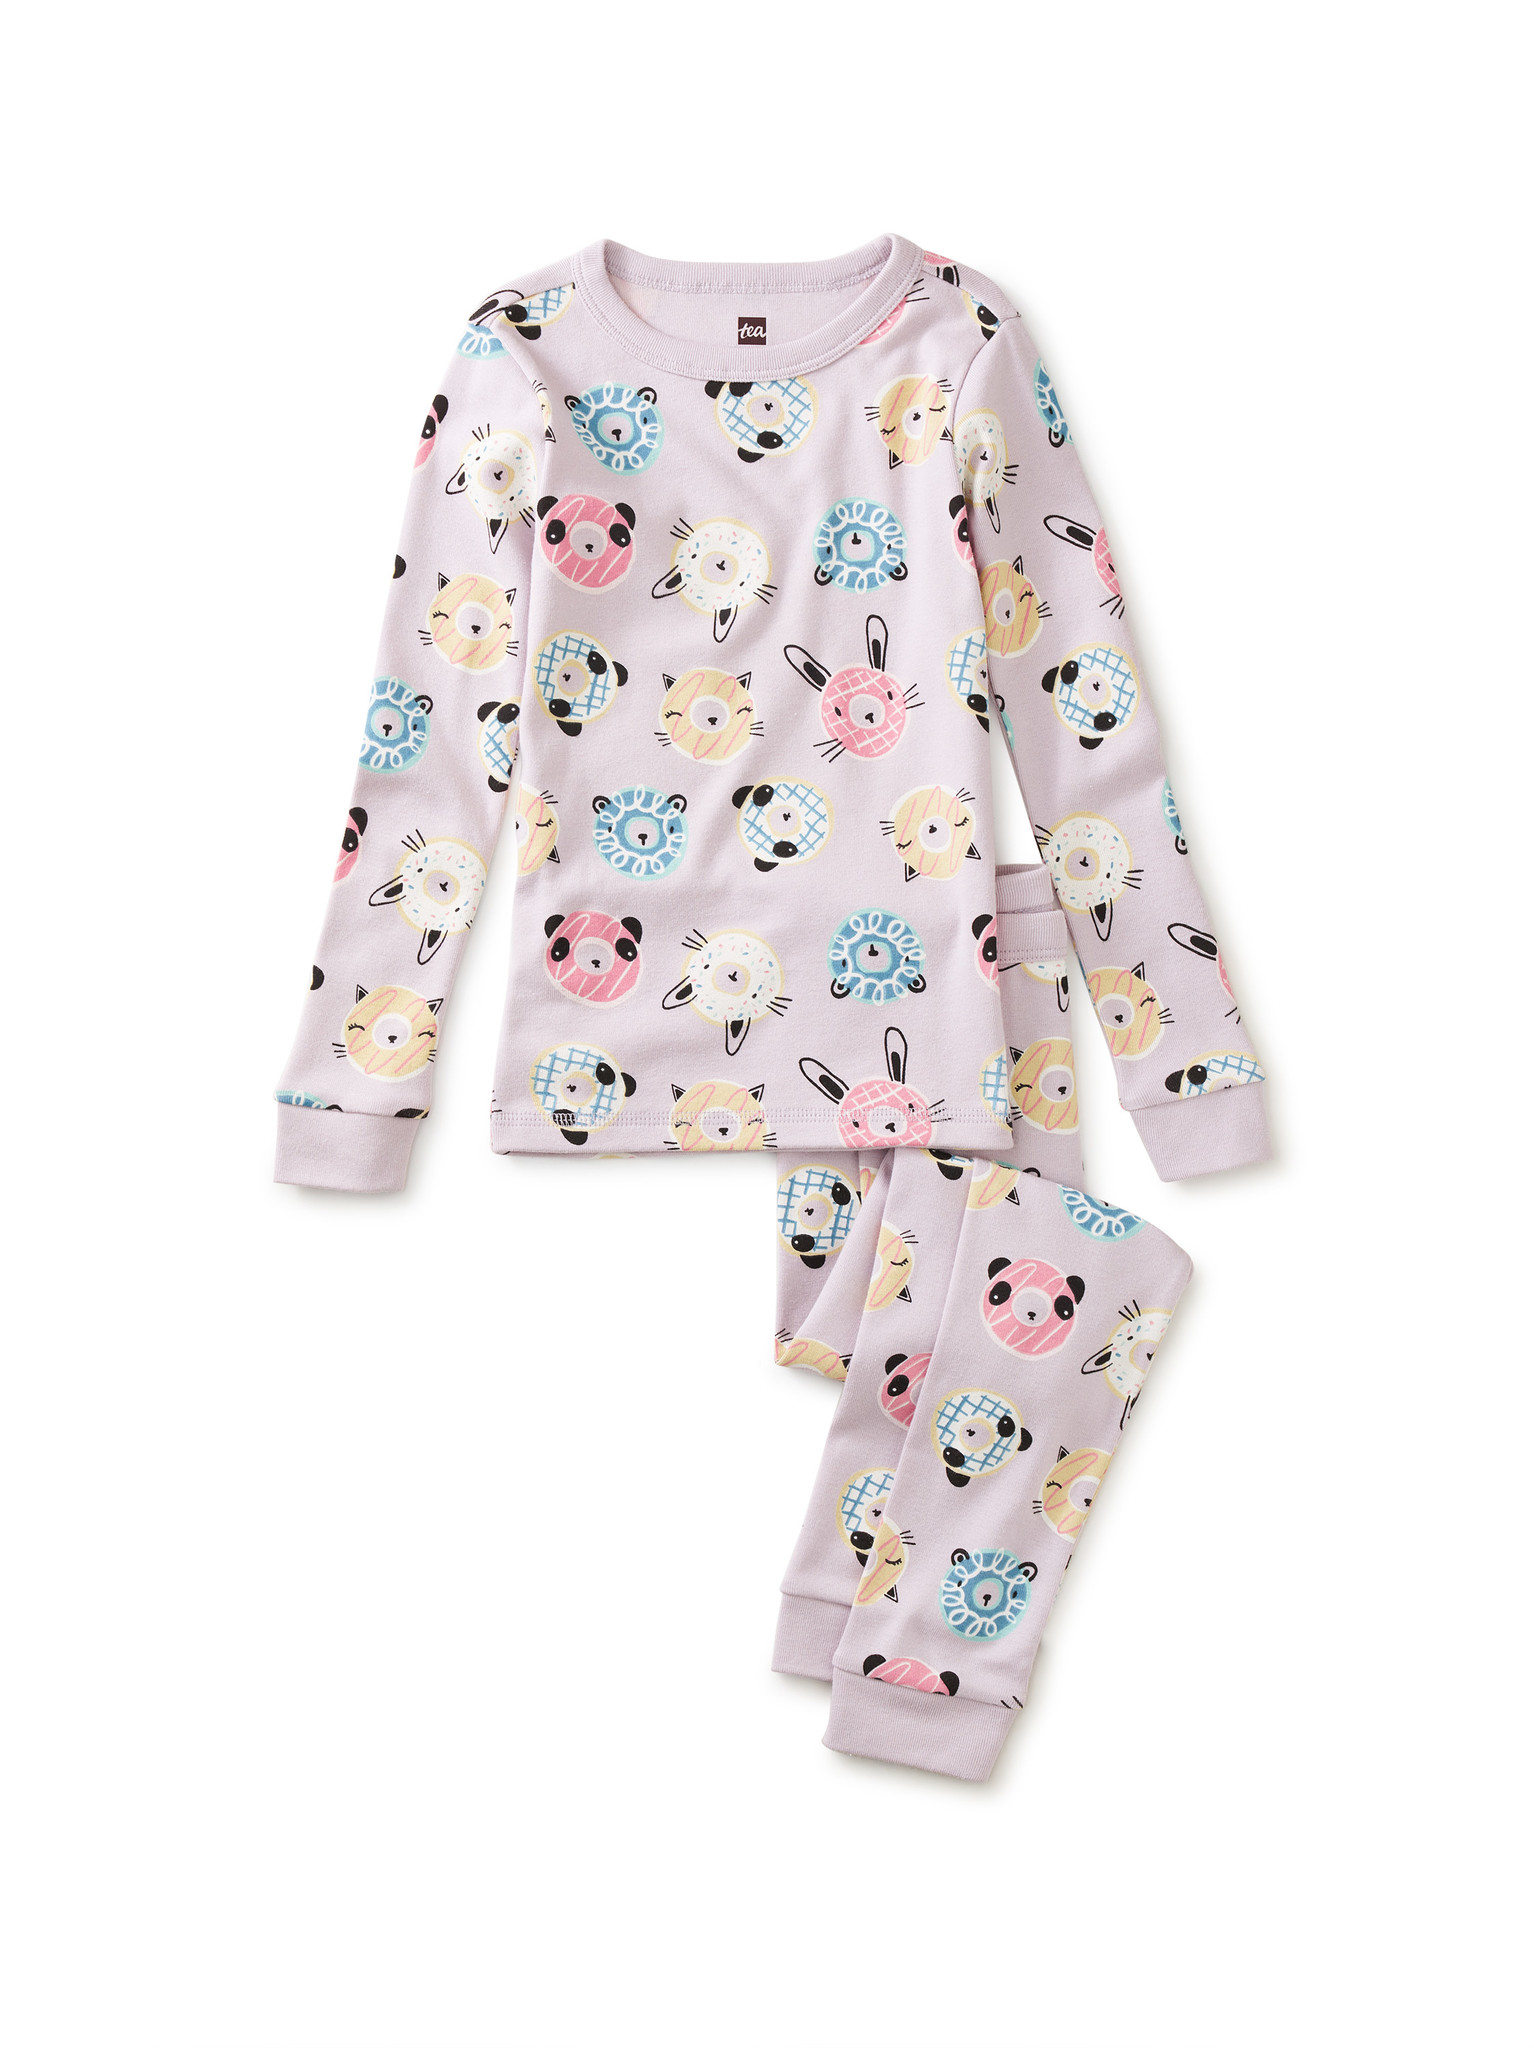 Tea Collection Donut Friends Baby Pajamas